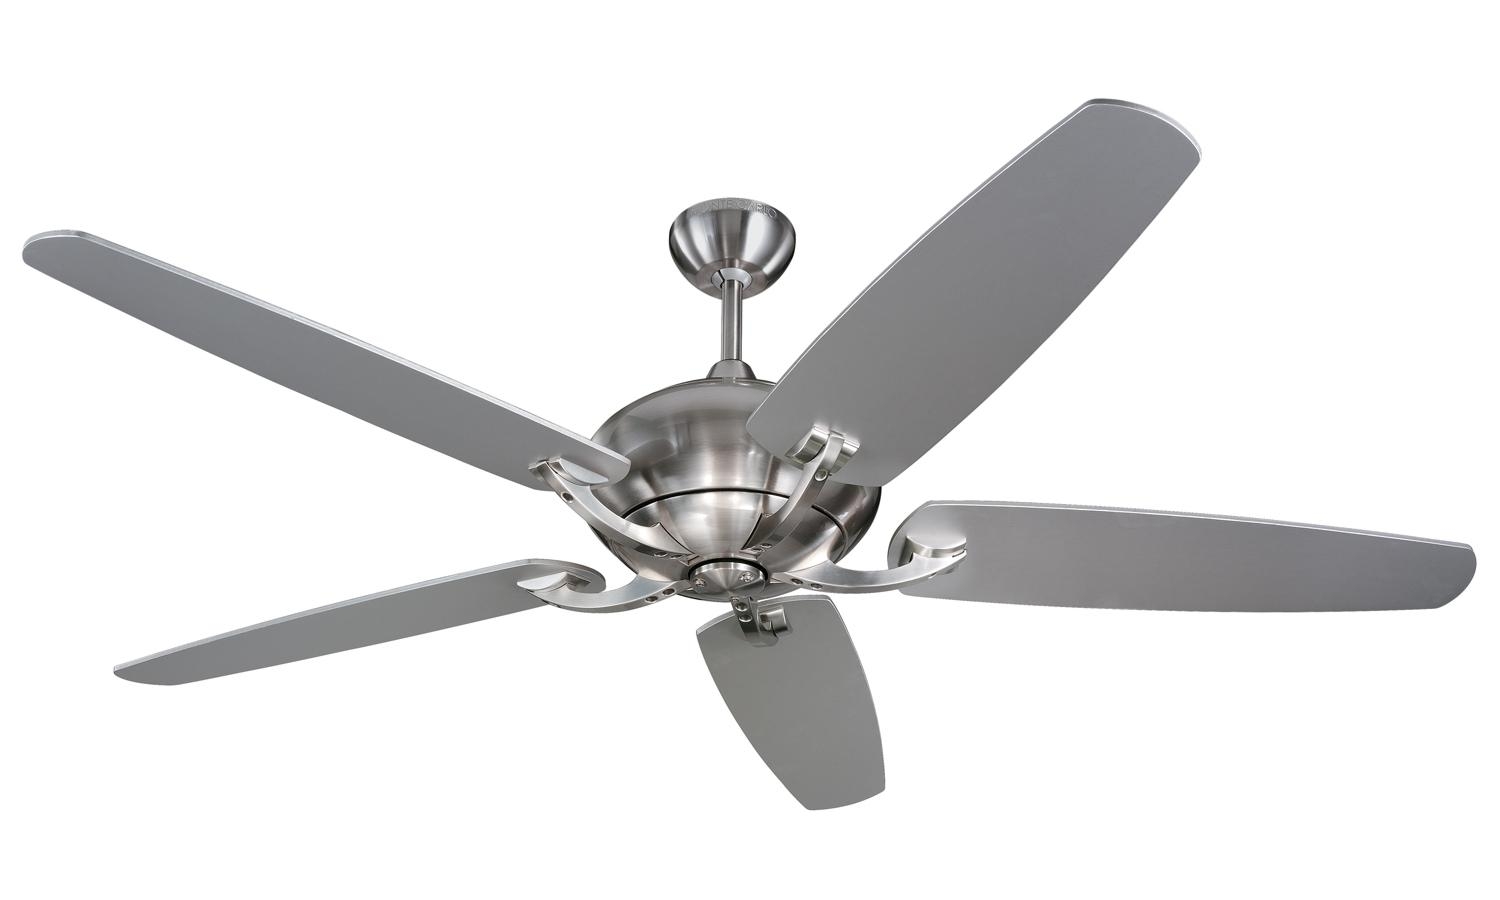 Large Ceiling Fan Without Light